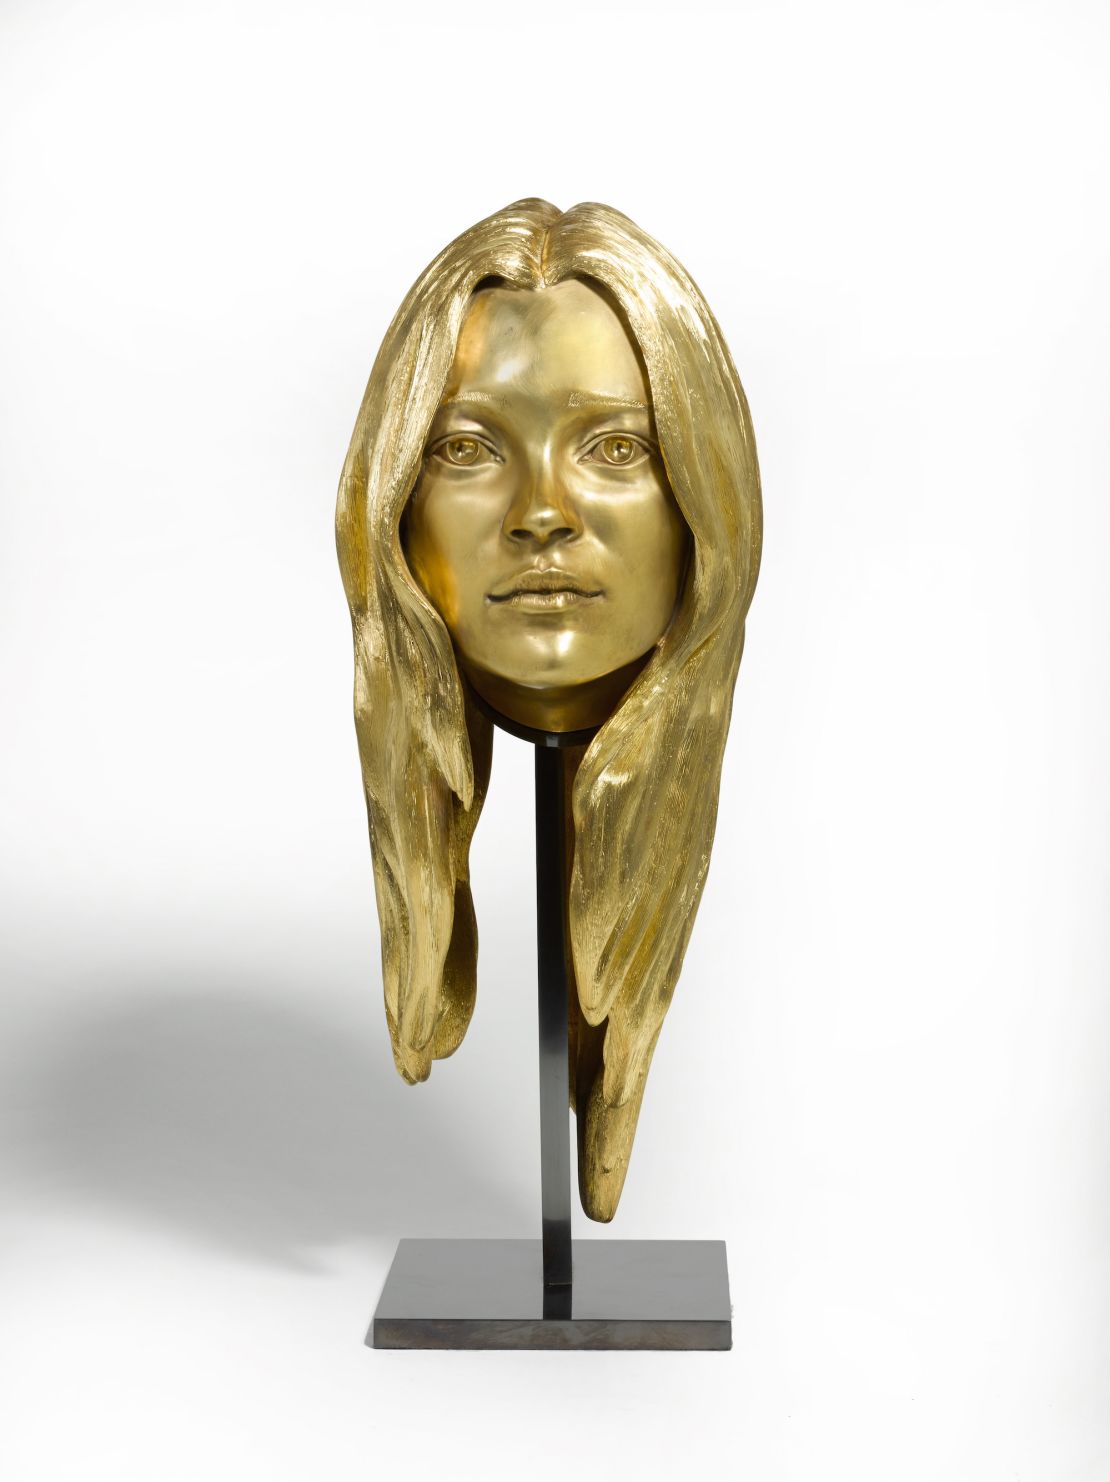 "Song of the Siren," a sculpture by Marc Quinn depicting supermodel Kate Moss.